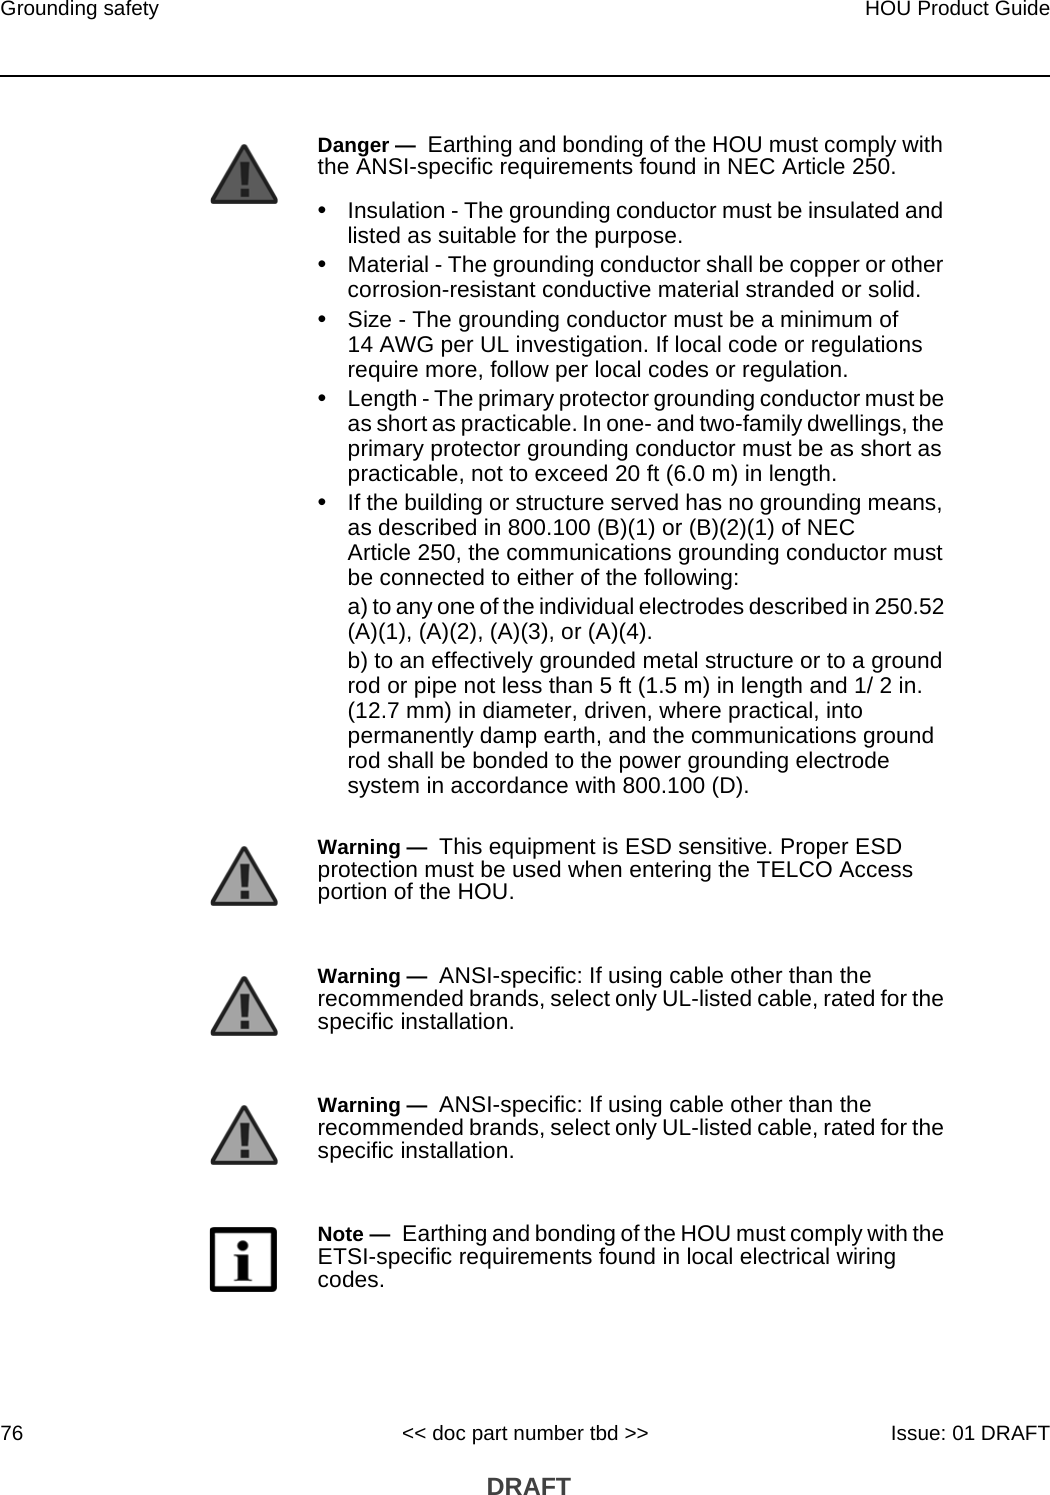 Grounding safety76HOU Product Guide&lt;&lt; doc part number tbd &gt;&gt; Issue: 01 DRAFT DRAFTDanger —  Earthing and bonding of the HOU must comply with the ANSI-specific requirements found in NEC Article 250.•Insulation - The grounding conductor must be insulated and listed as suitable for the purpose.•Material - The grounding conductor shall be copper or other corrosion-resistant conductive material stranded or solid.•Size - The grounding conductor must be a minimum of 14 AWG per UL investigation. If local code or regulations require more, follow per local codes or regulation.•Length - The primary protector grounding conductor must be as short as practicable. In one- and two-family dwellings, the primary protector grounding conductor must be as short as practicable, not to exceed 20 ft (6.0 m) in length.•If the building or structure served has no grounding means, as described in 800.100 (B)(1) or (B)(2)(1) of NEC Article 250, the communications grounding conductor must be connected to either of the following:a) to any one of the individual electrodes described in 250.52 (A)(1), (A)(2), (A)(3), or (A)(4).b) to an effectively grounded metal structure or to a ground rod or pipe not less than 5 ft (1.5 m) in length and 1/ 2 in. (12.7 mm) in diameter, driven, where practical, into permanently damp earth, and the communications ground rod shall be bonded to the power grounding electrode system in accordance with 800.100 (D).Warning —  This equipment is ESD sensitive. Proper ESD protection must be used when entering the TELCO Access portion of the HOU.Warning —  ANSI-specific: If using cable other than the recommended brands, select only UL-listed cable, rated for the specific installation.Warning —  ANSI-specific: If using cable other than the recommended brands, select only UL-listed cable, rated for the specific installation.Note —  Earthing and bonding of the HOU must comply with the ETSI-specific requirements found in local electrical wiring codes.